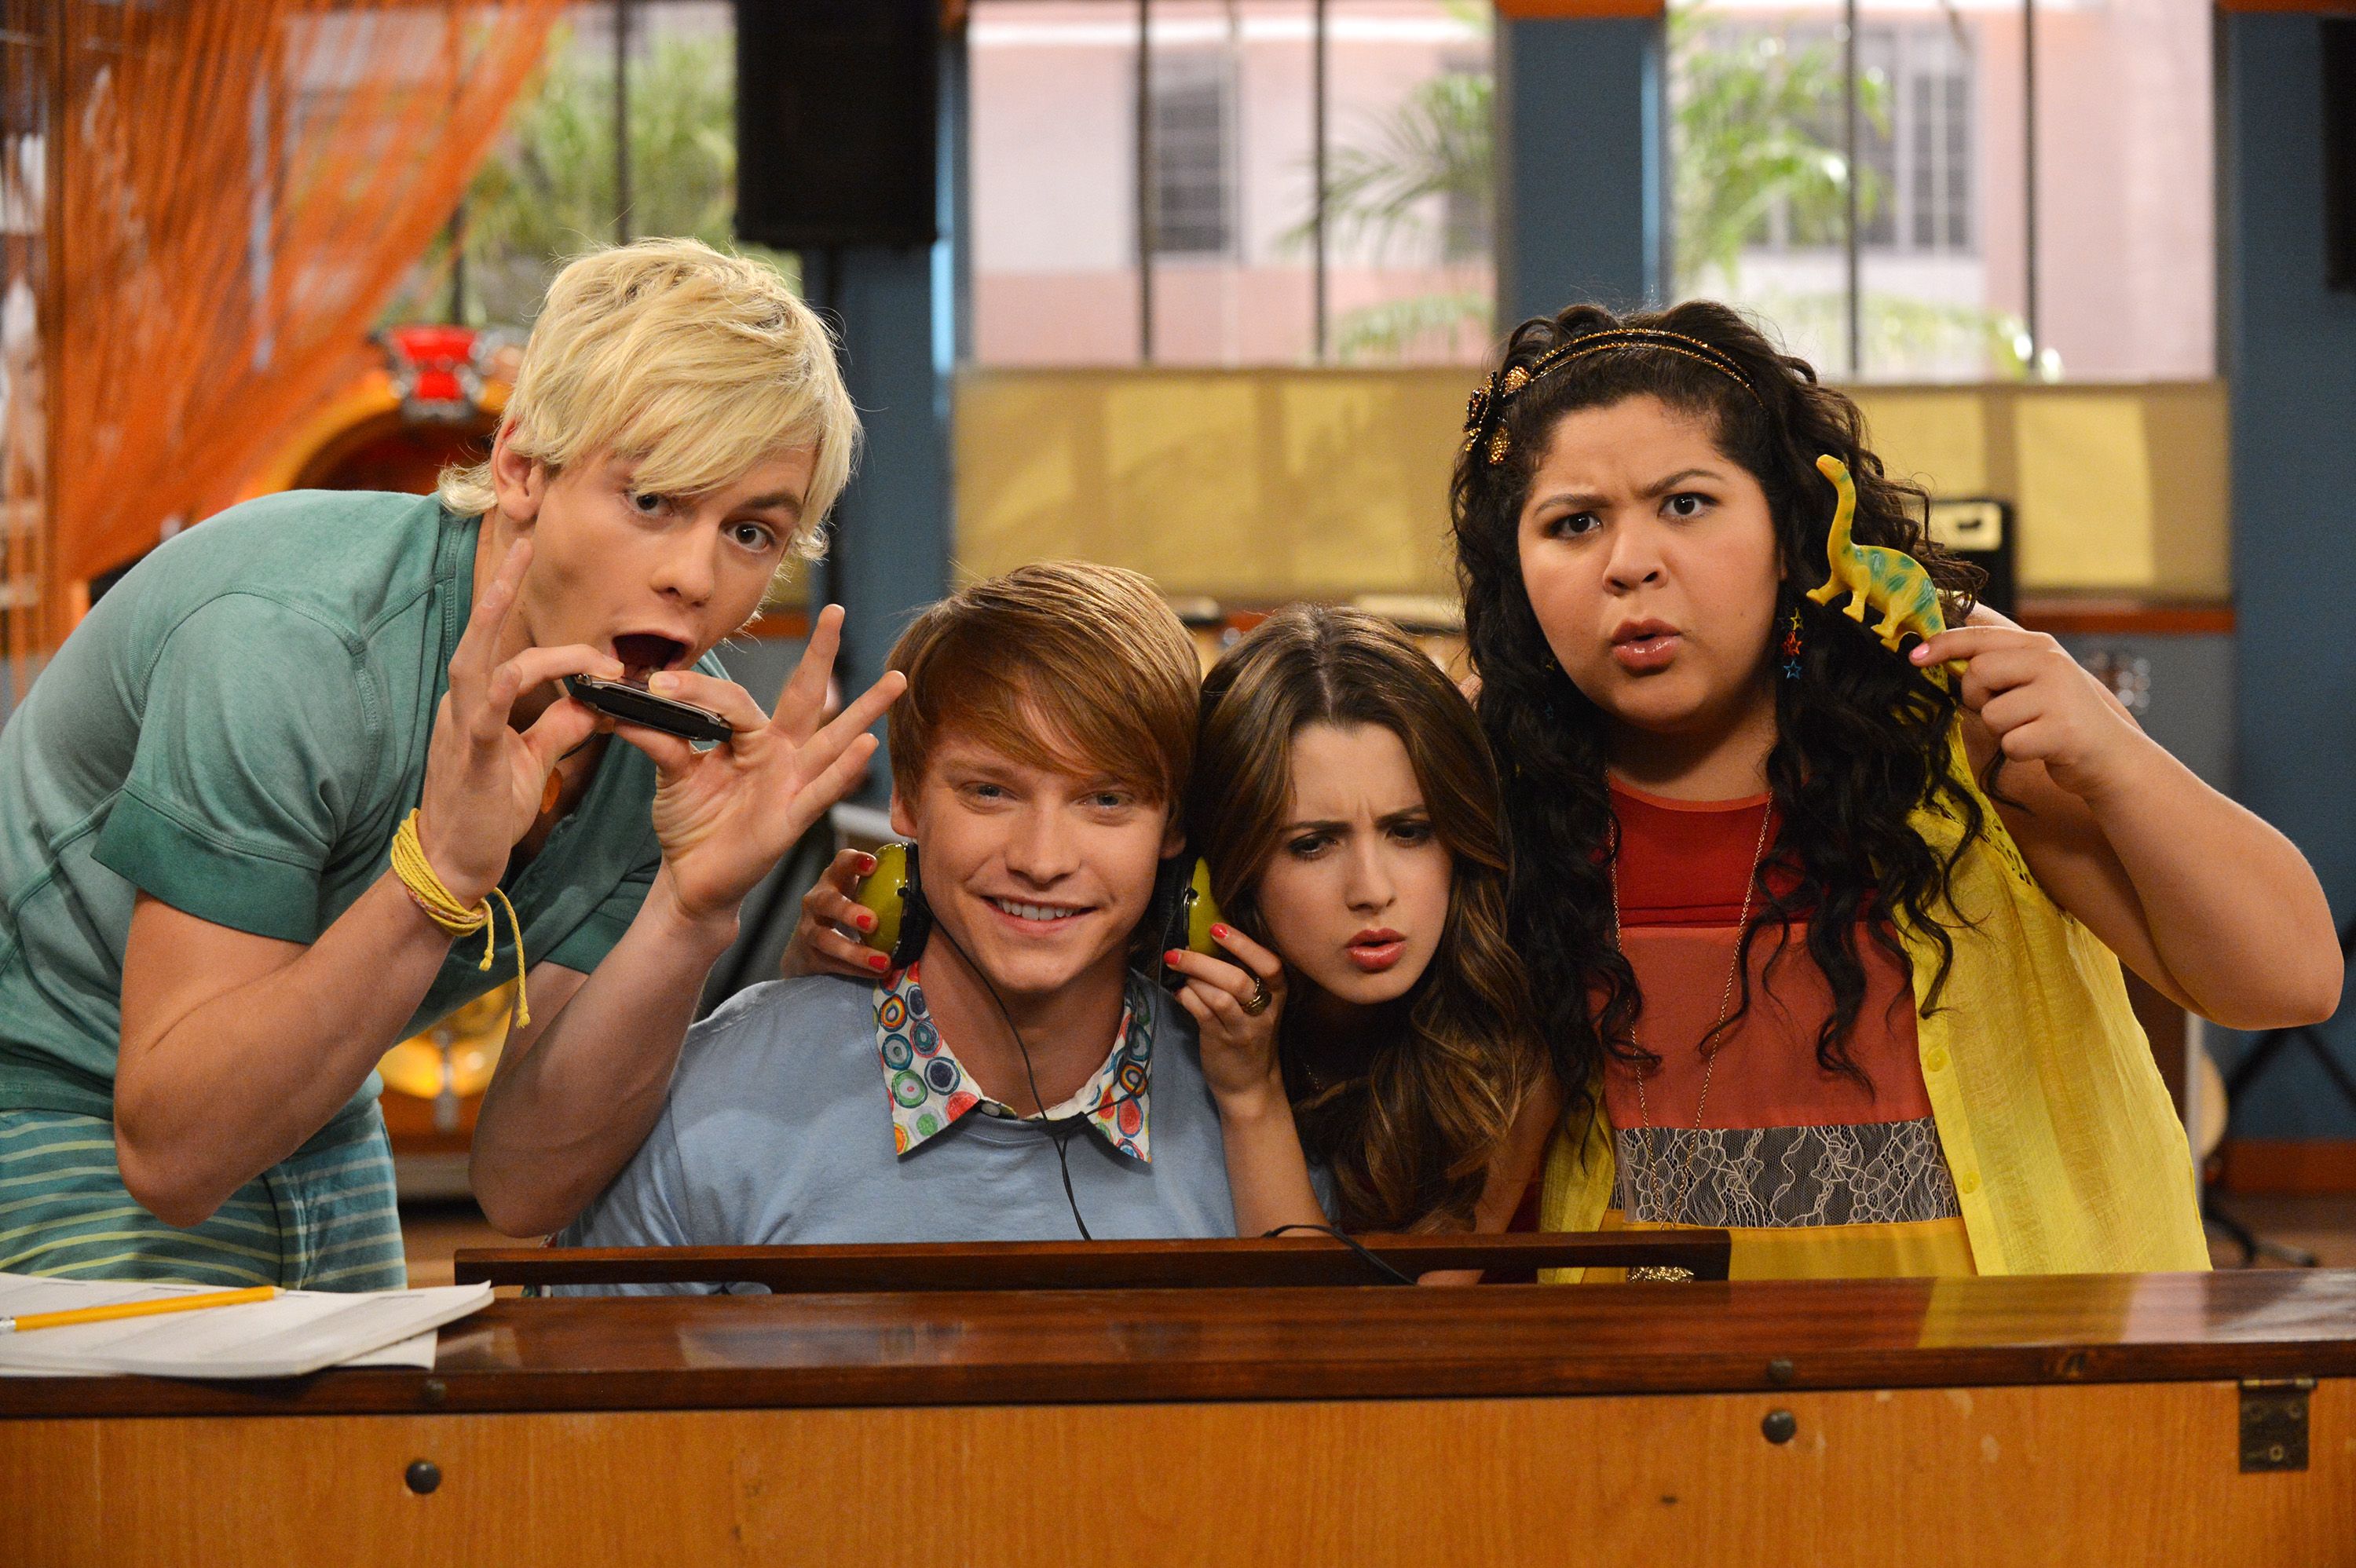 do austin and ally date in the show